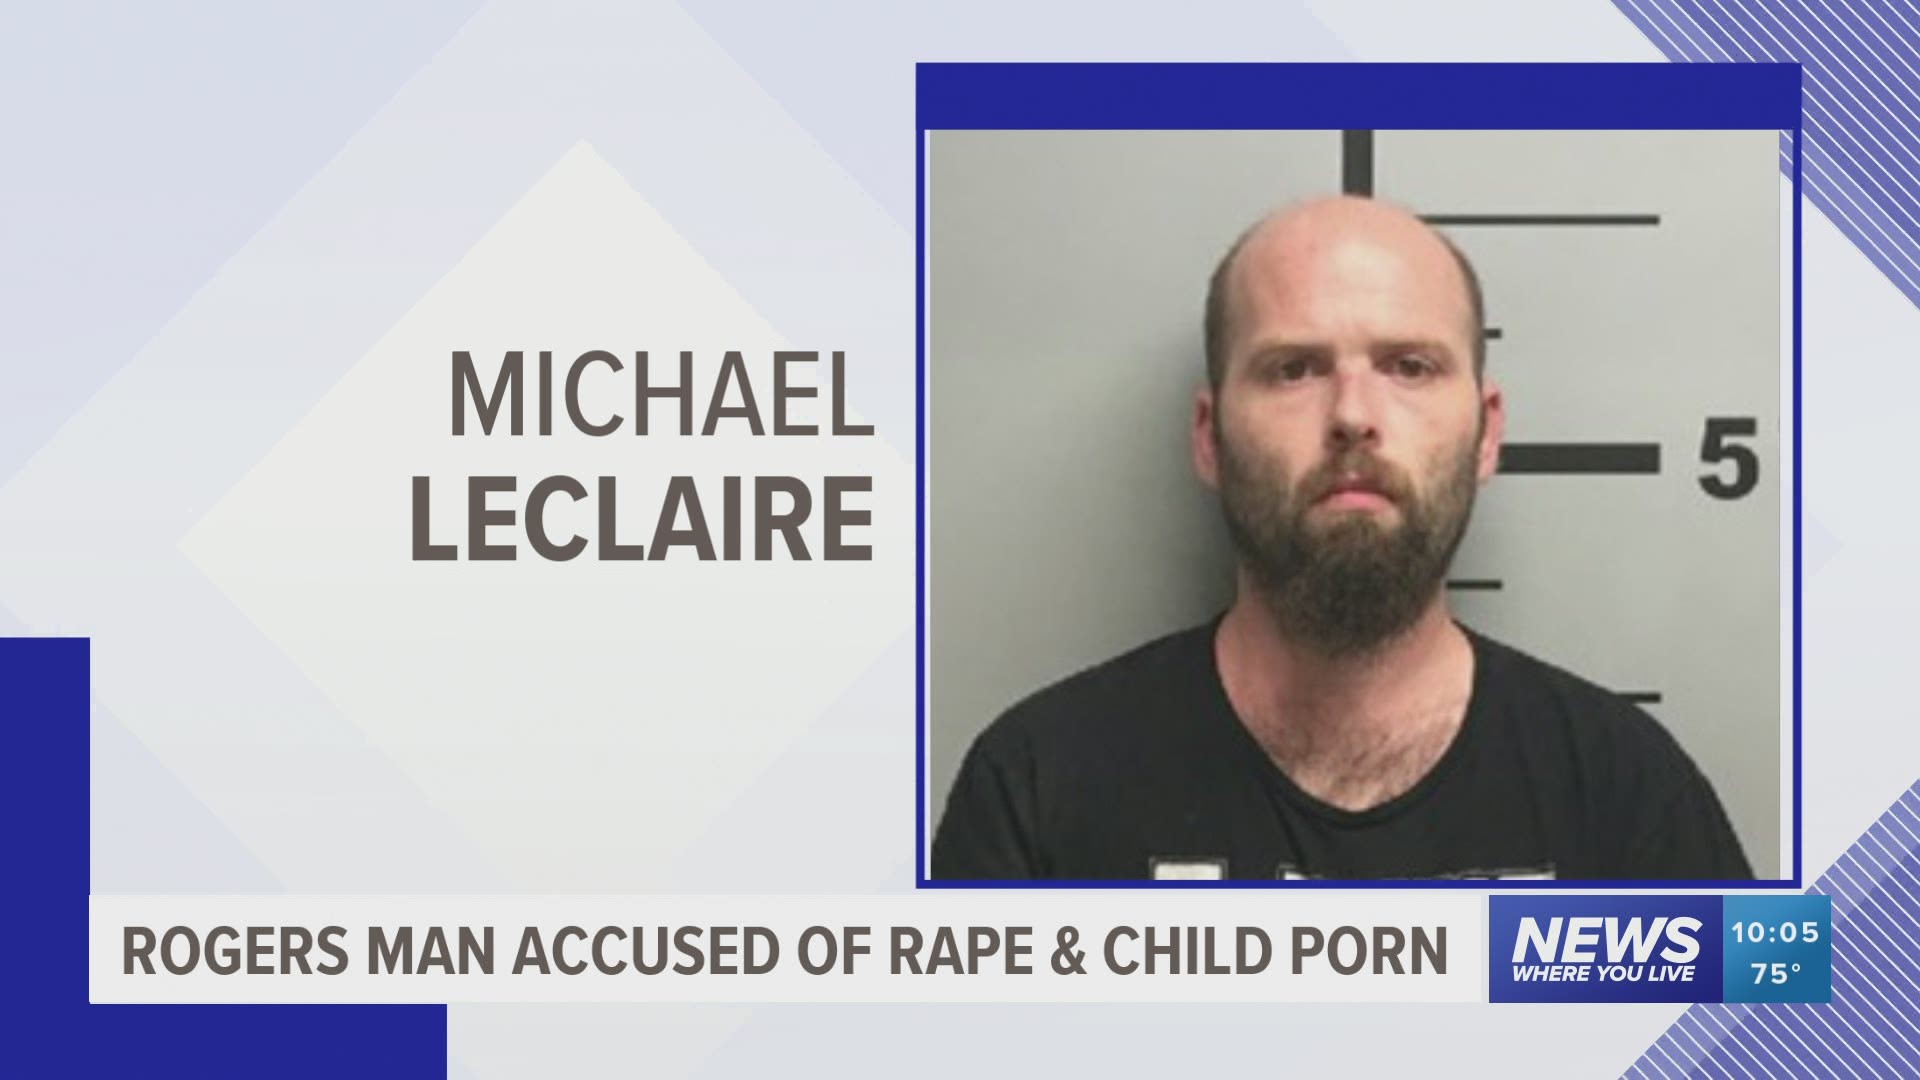 Nude Rape - Man arrested for rape and child porn in Rogers | 5newsonline.com